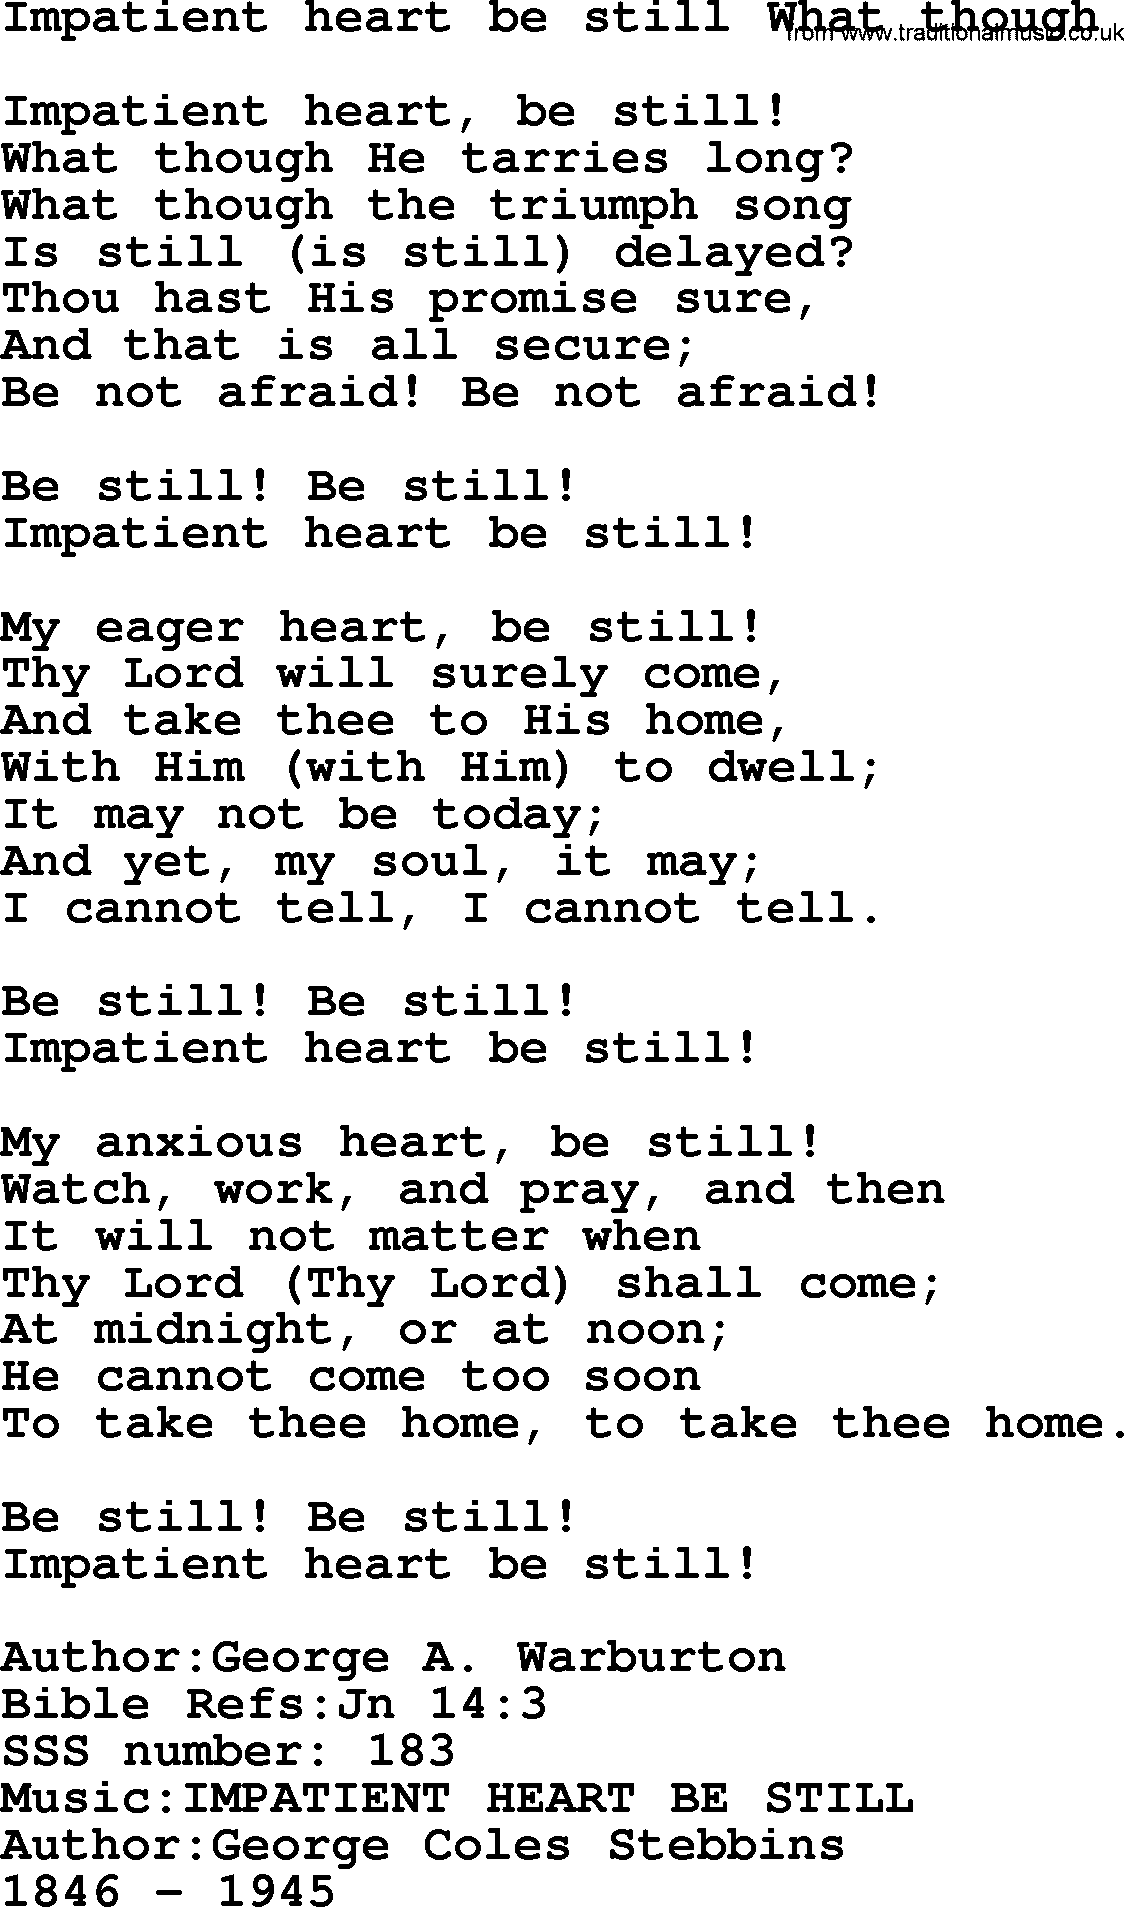 Sacred Songs and Solos complete, 1200 Hymns, title: Impatient Heart Be Still What Though, lyrics and PDF